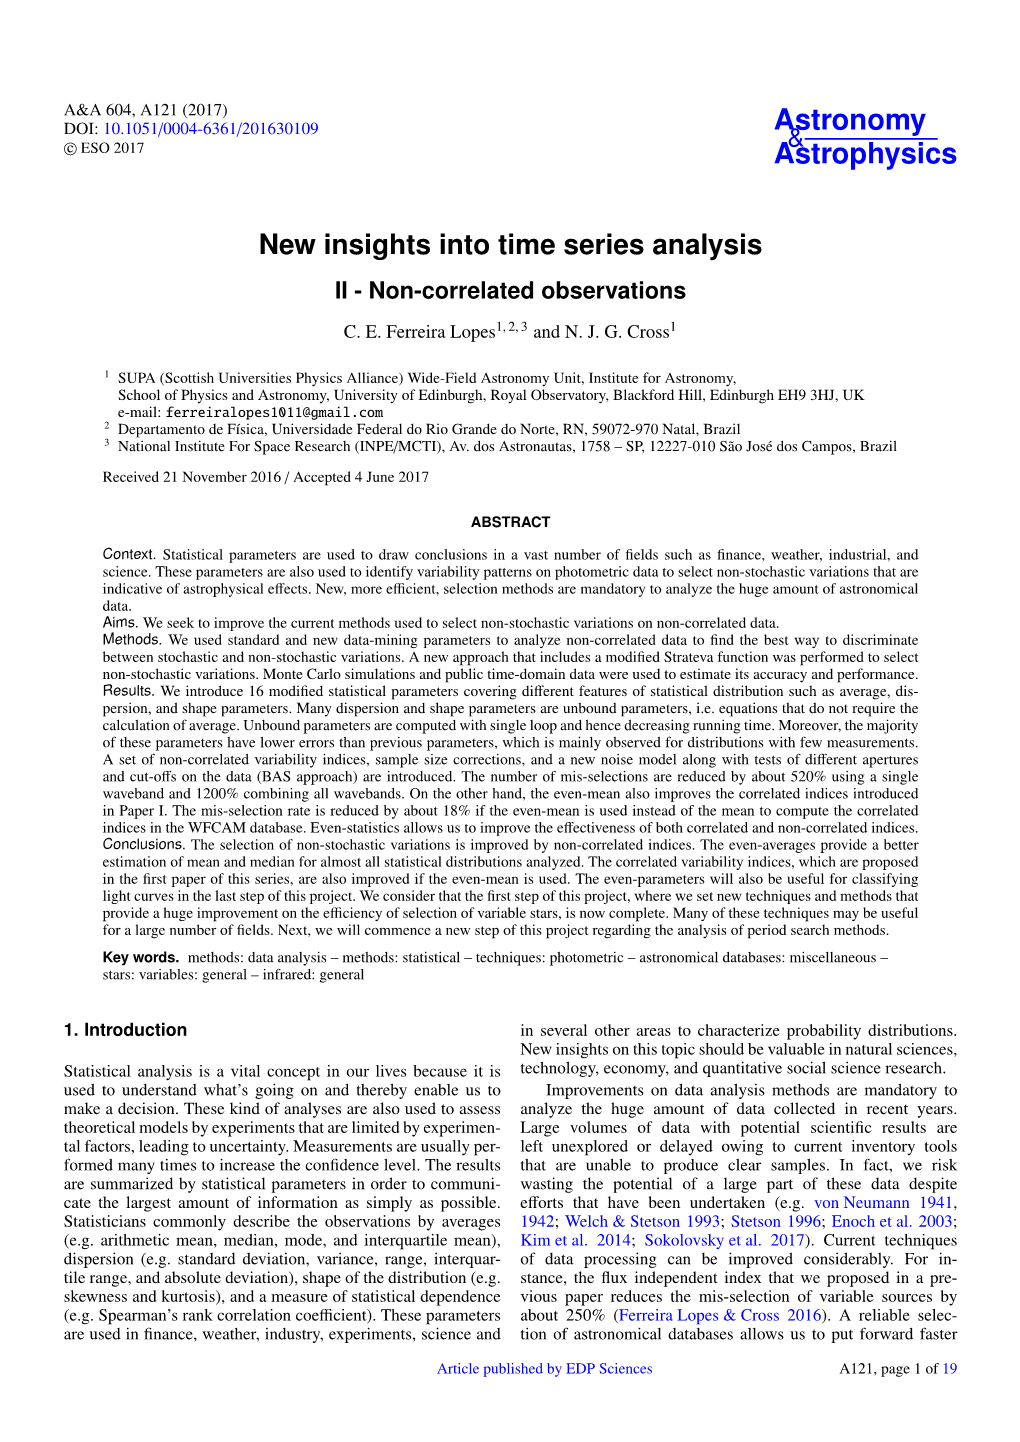 New Insights Into Time Series Analysis II - Non-Correlated Observations